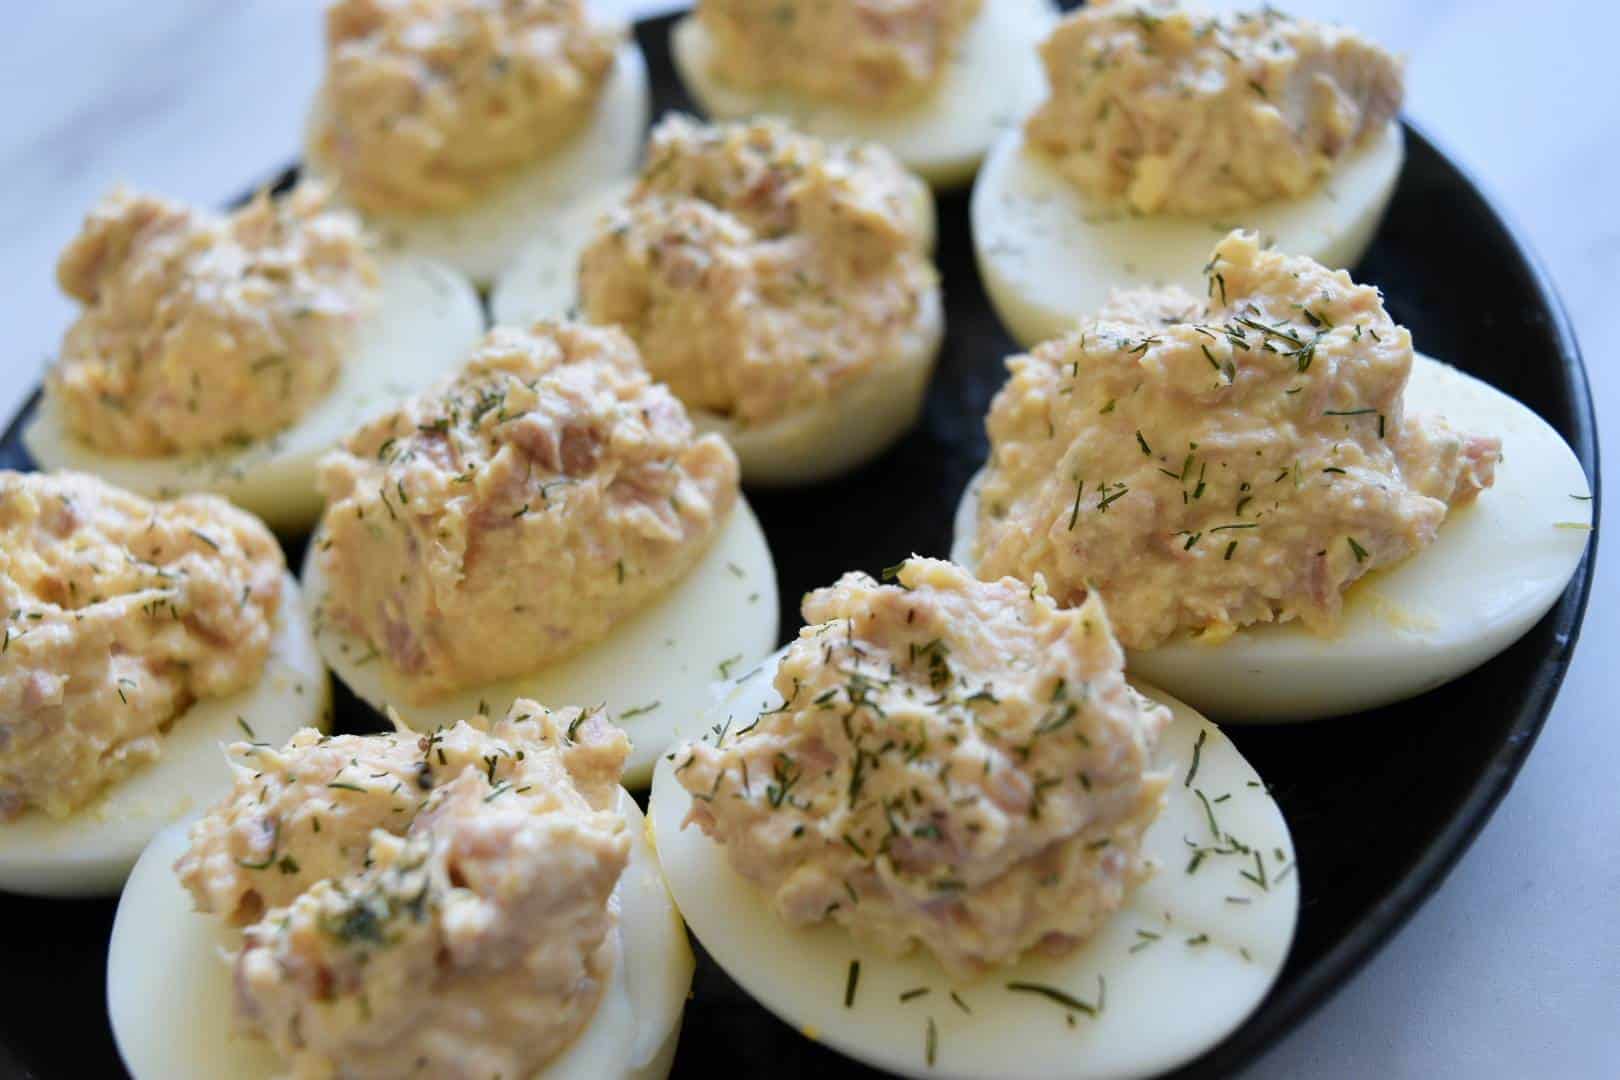 Deviled eggs with tuna plated.